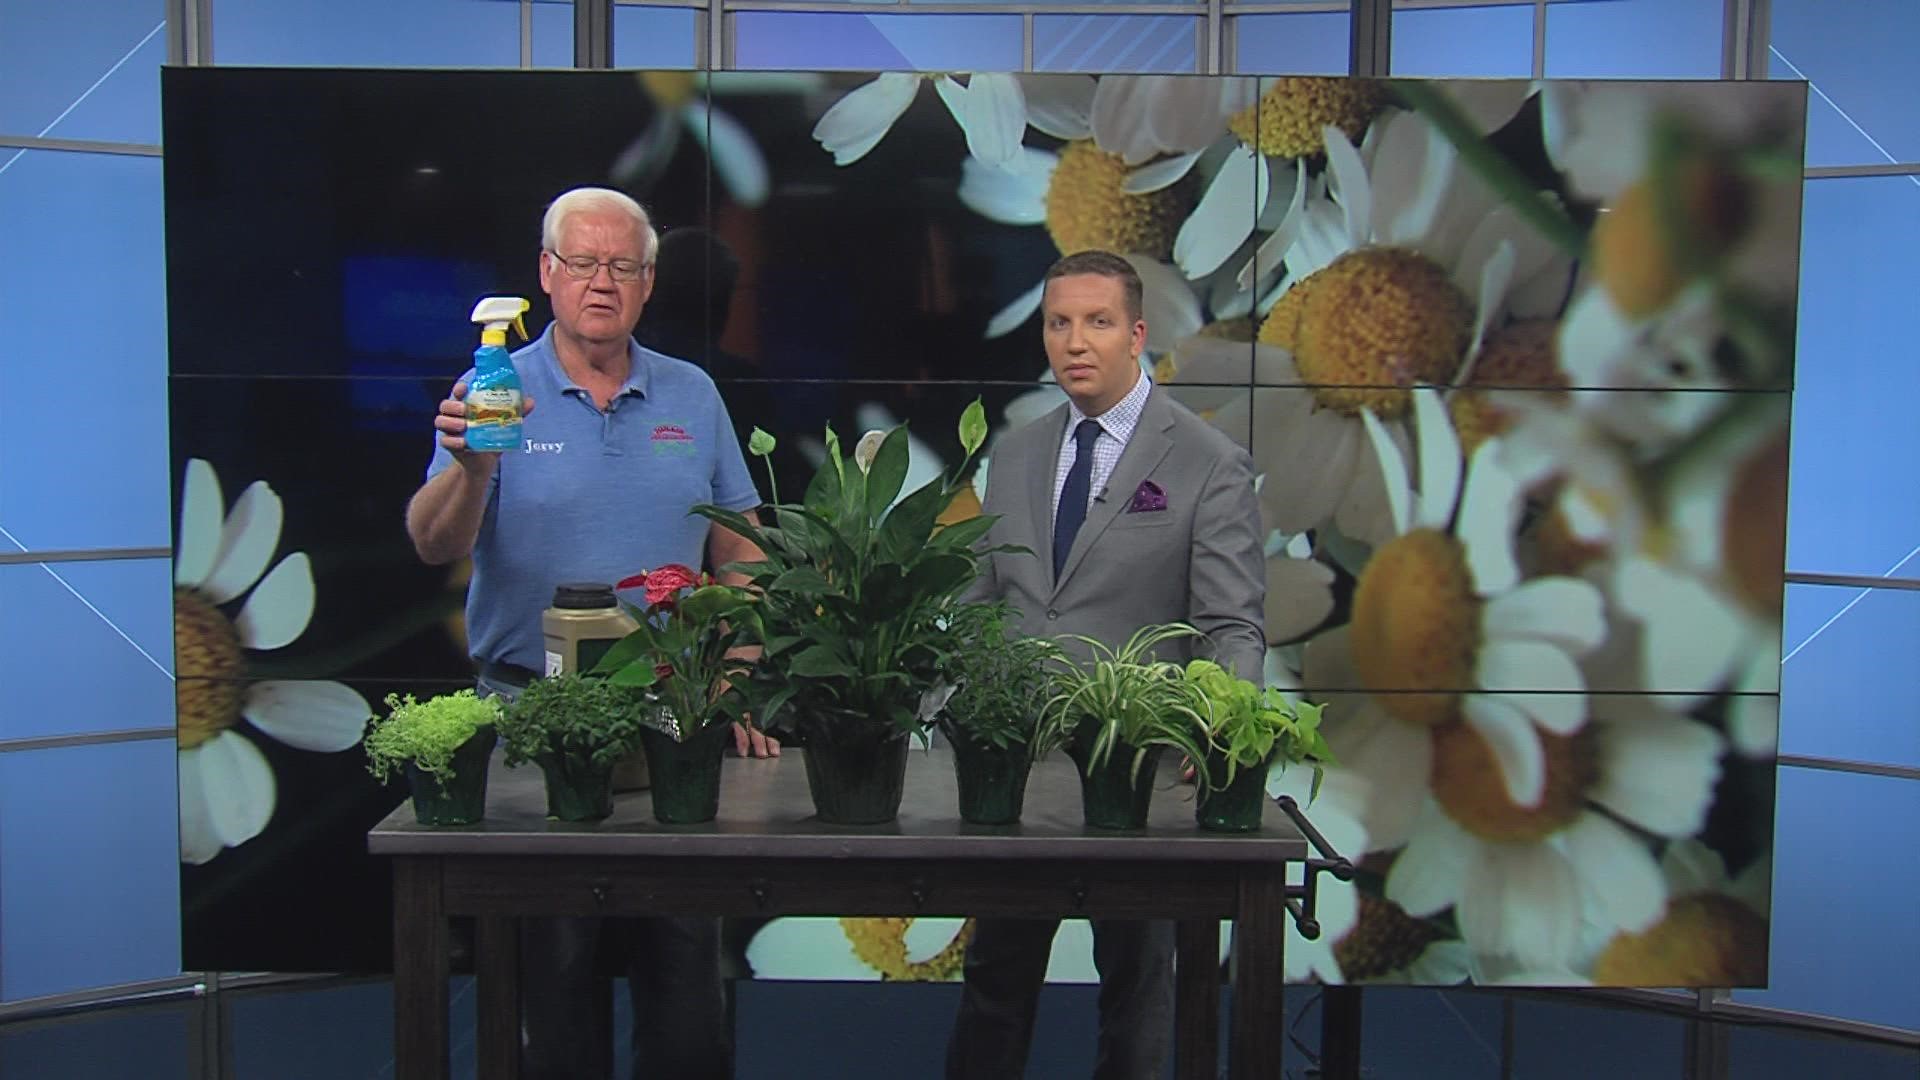 Jerry Holub talks about protecting your plants from insects and weather this fall.